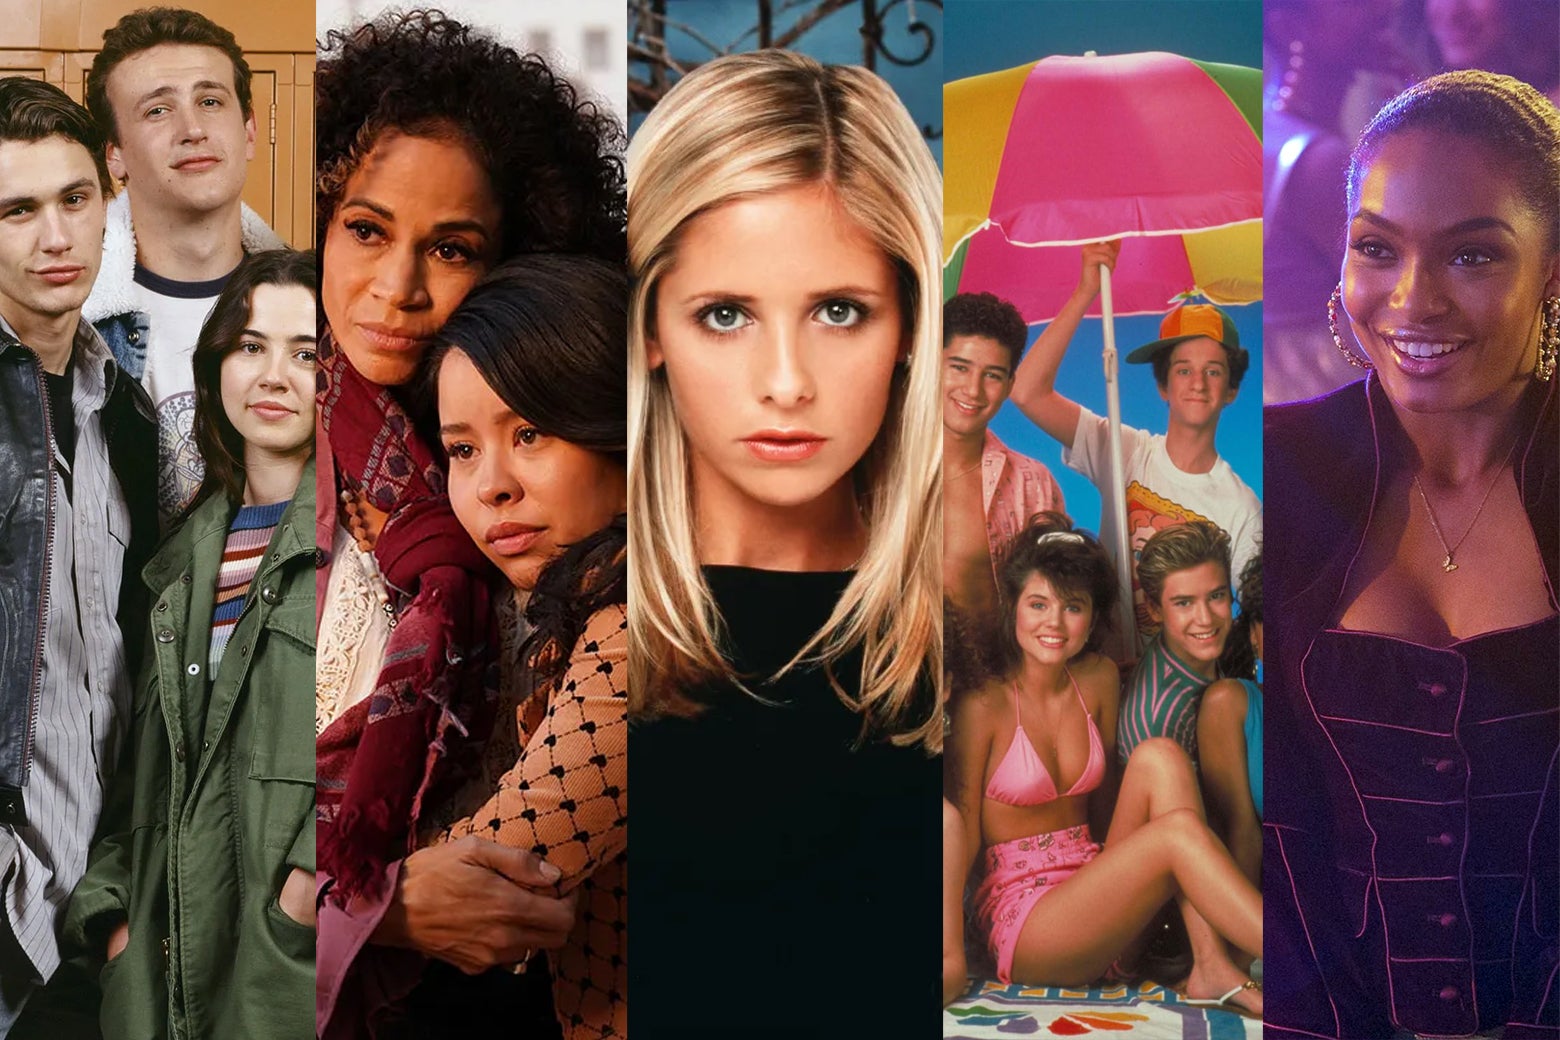 Collage with Freaks and Geeks, Good Trouble, Buffy the Vampire Slayer, Saved by the Bell, Grown-ish.